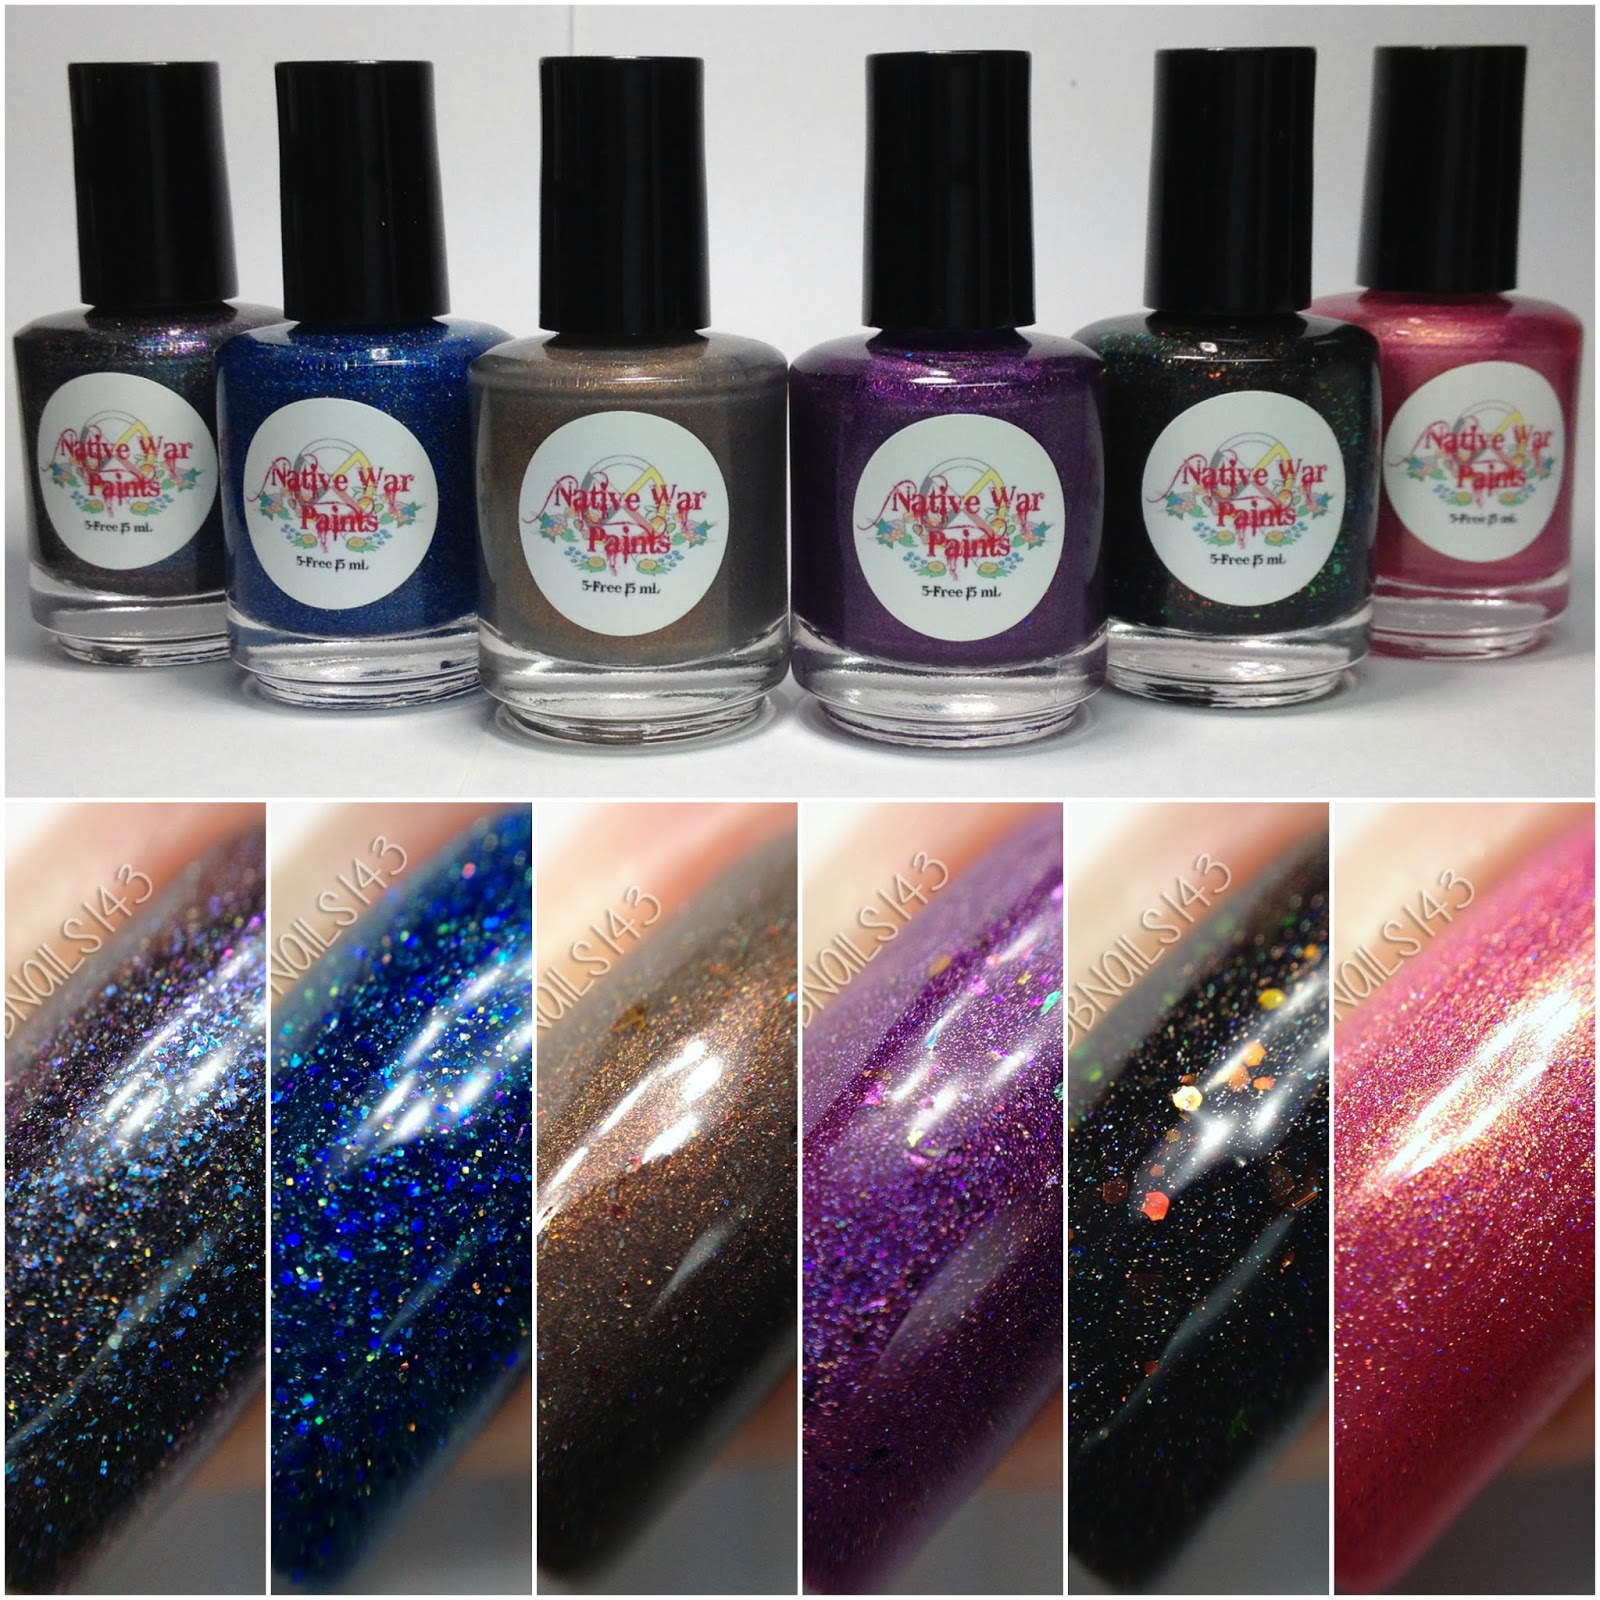 Native War Paints | I'll Be There For You - cdbnails